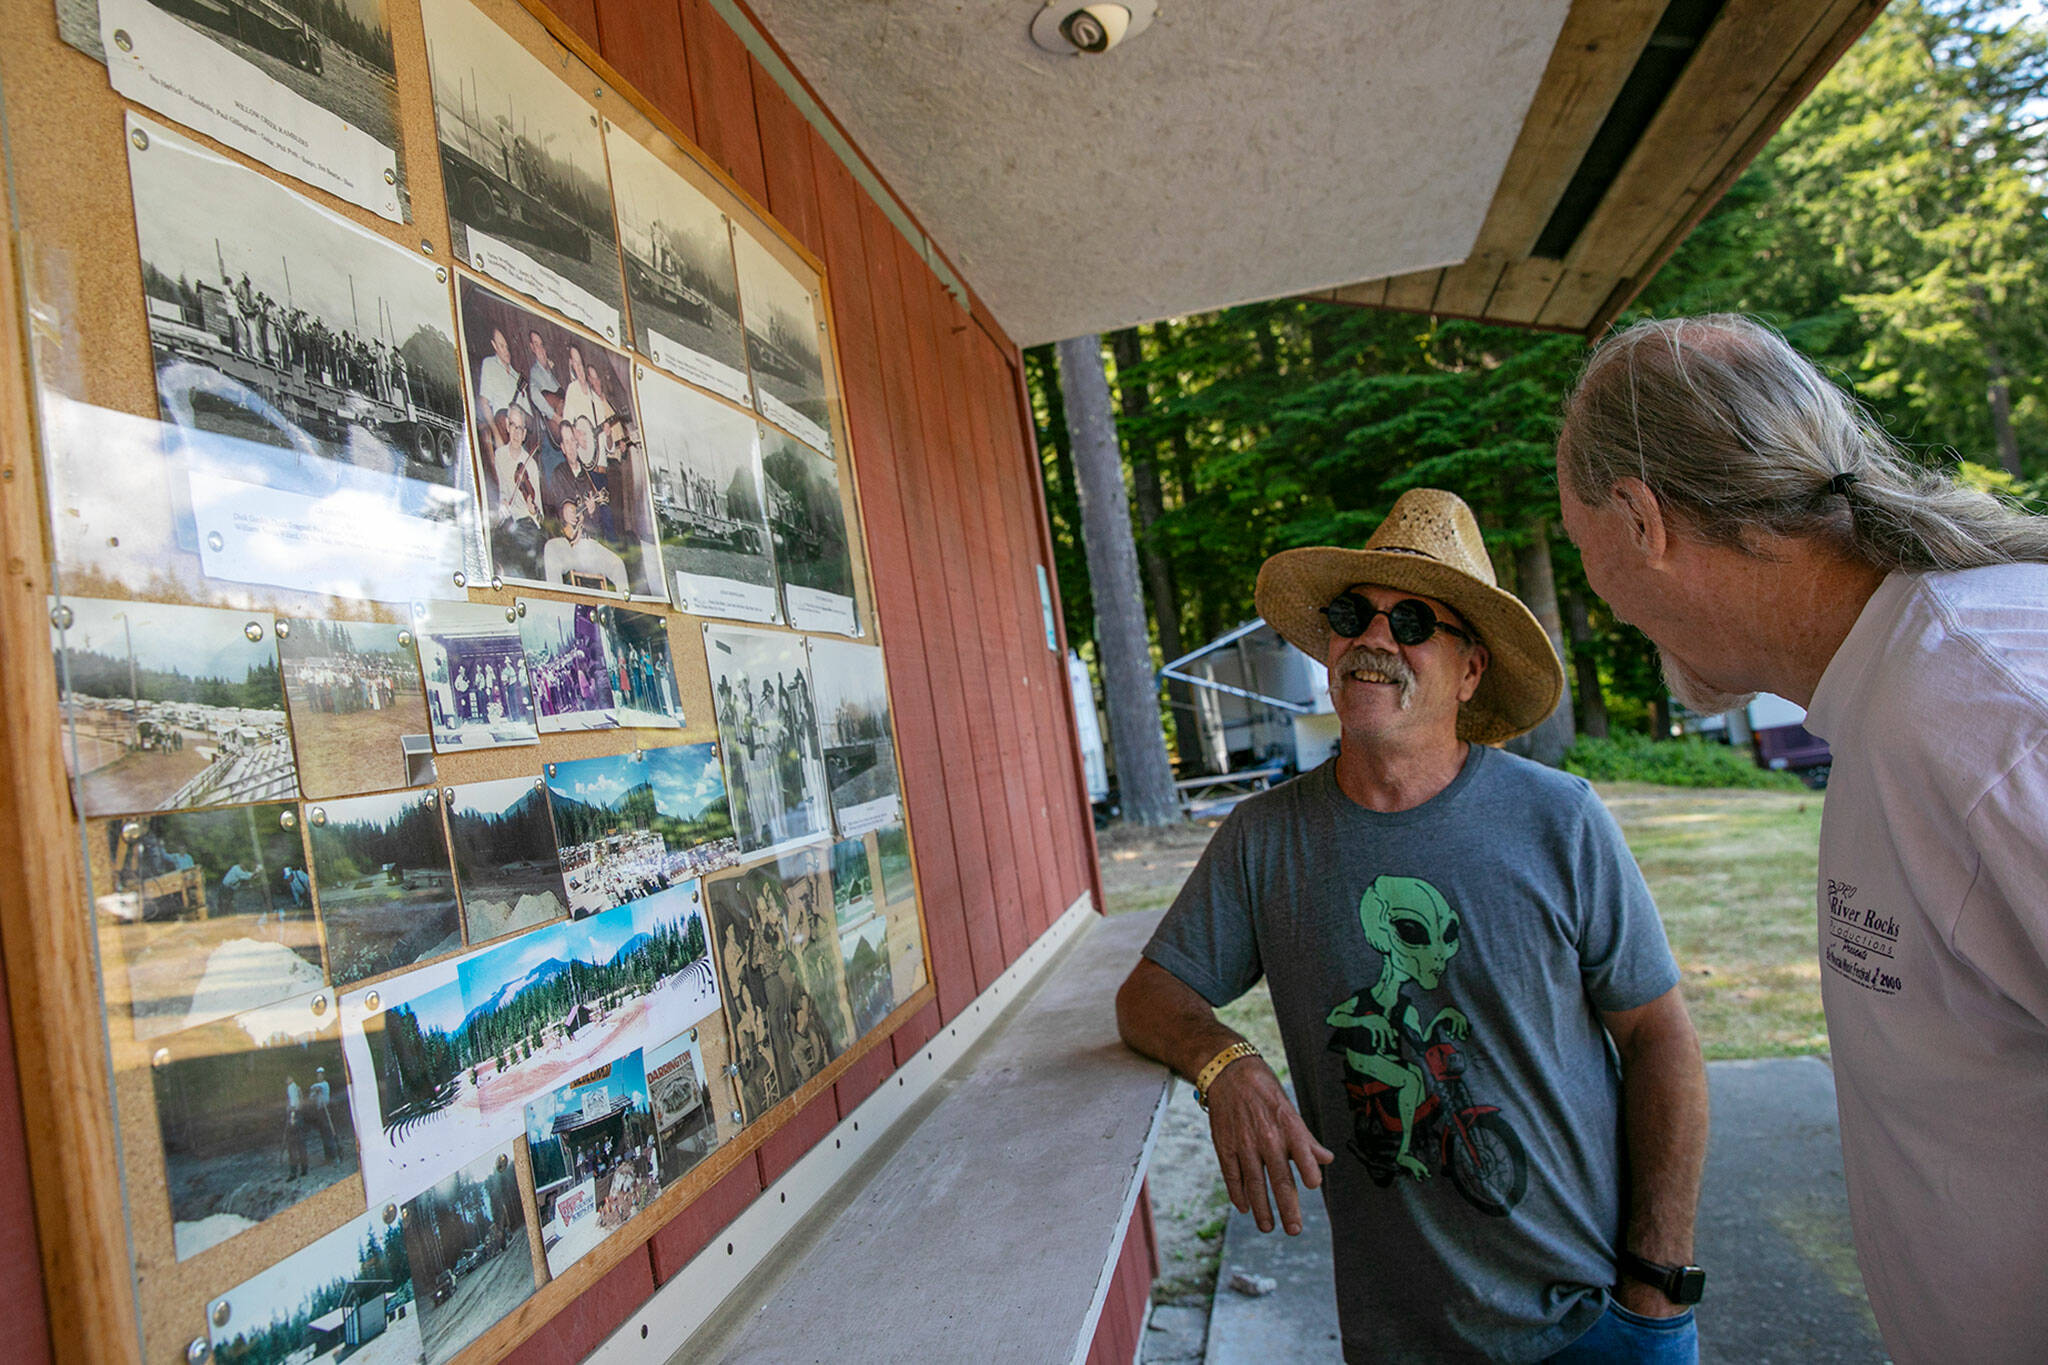 Mike Calkins and Patrick Robison talk about the history of the Darrington Bluegrass Festival on Wednesday, at Darrington Bluegrass Music Park in Darrington. (Ryan Berry / The Herald)